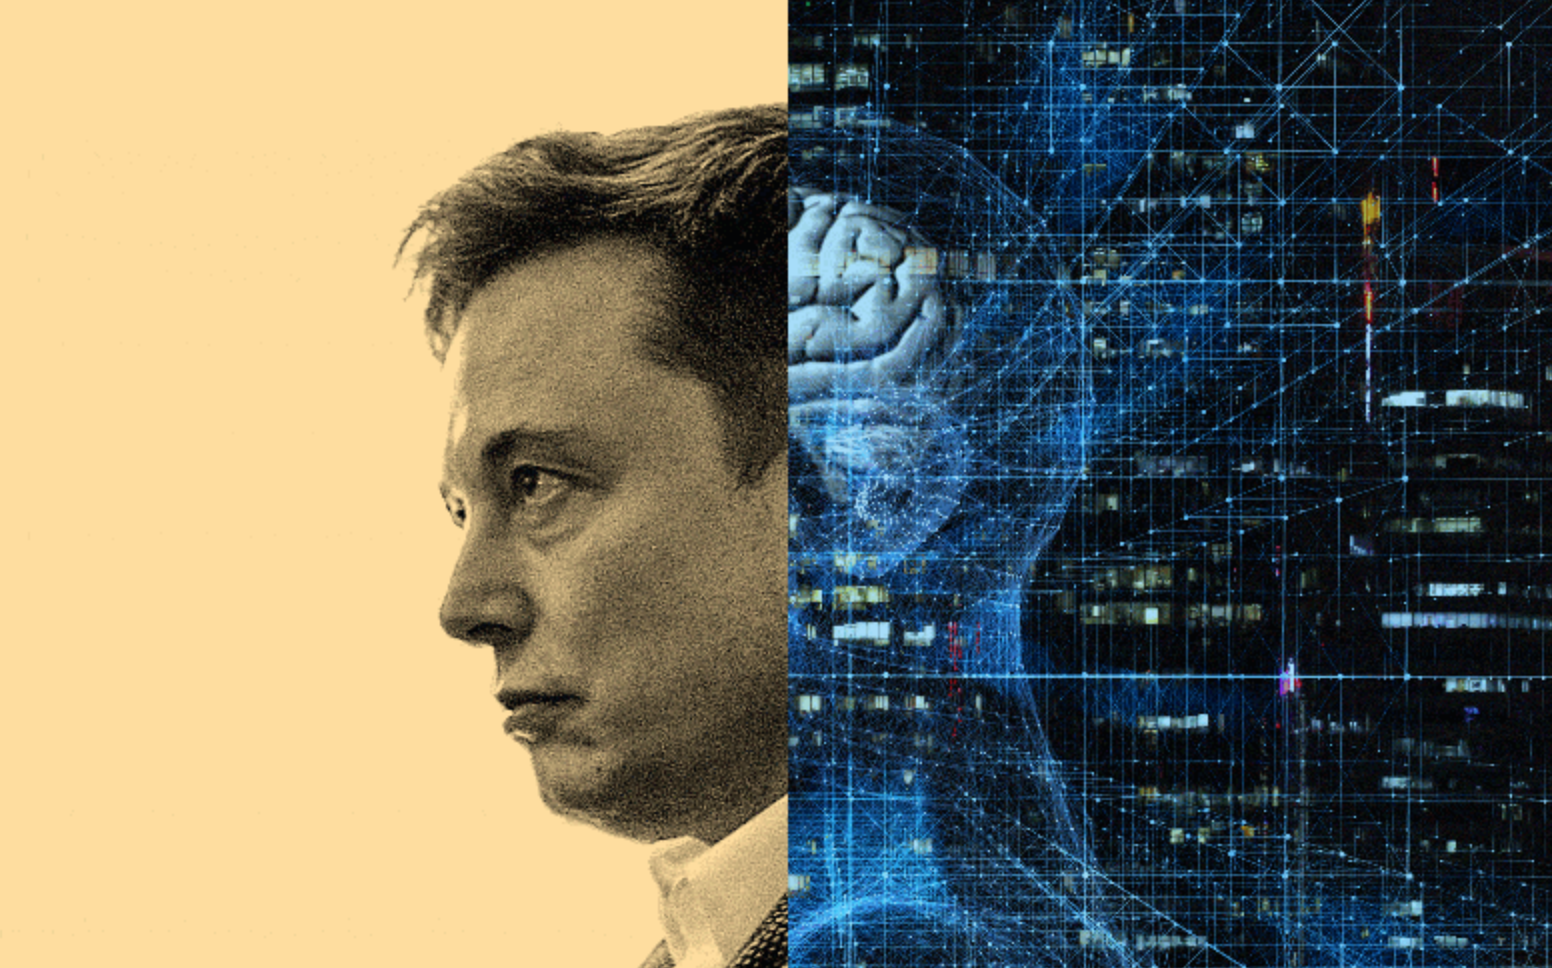 Musk: Neuralink Brain Implant Could Cure Depression And Addiction